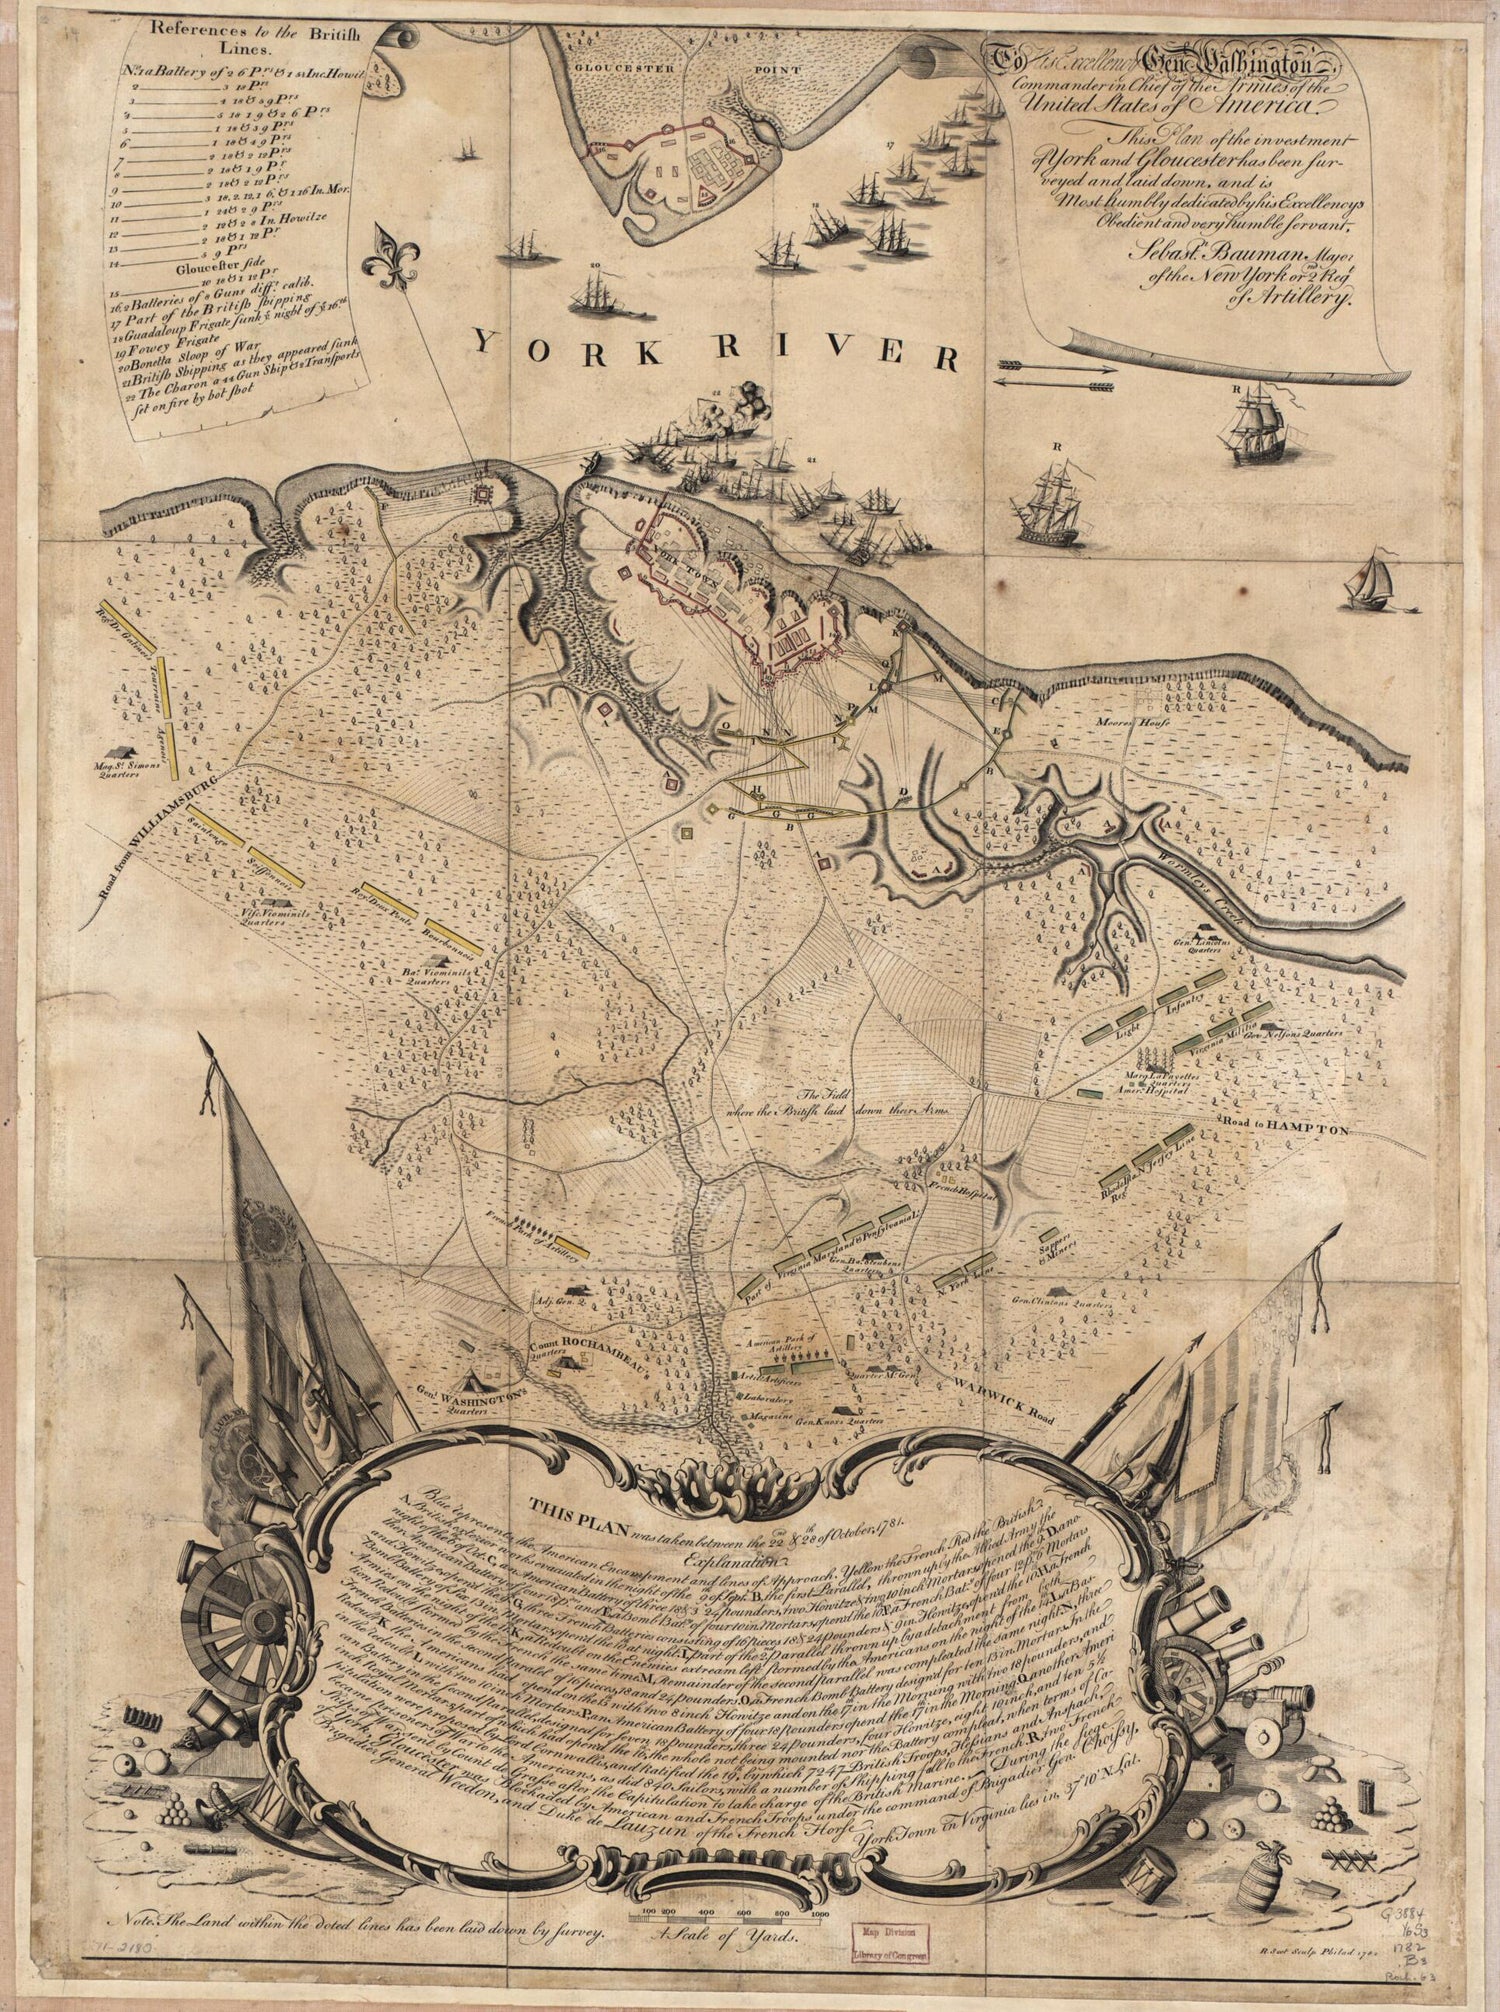 This old map of To His Excellency Genl. Washington, Commander In Chief of the Armies of the United States of America, This Plan of the Investment of York and Gloucester Has Been Surveyed and Laid Down from 1782 was created by Sebastian Bauman, Robert Sco